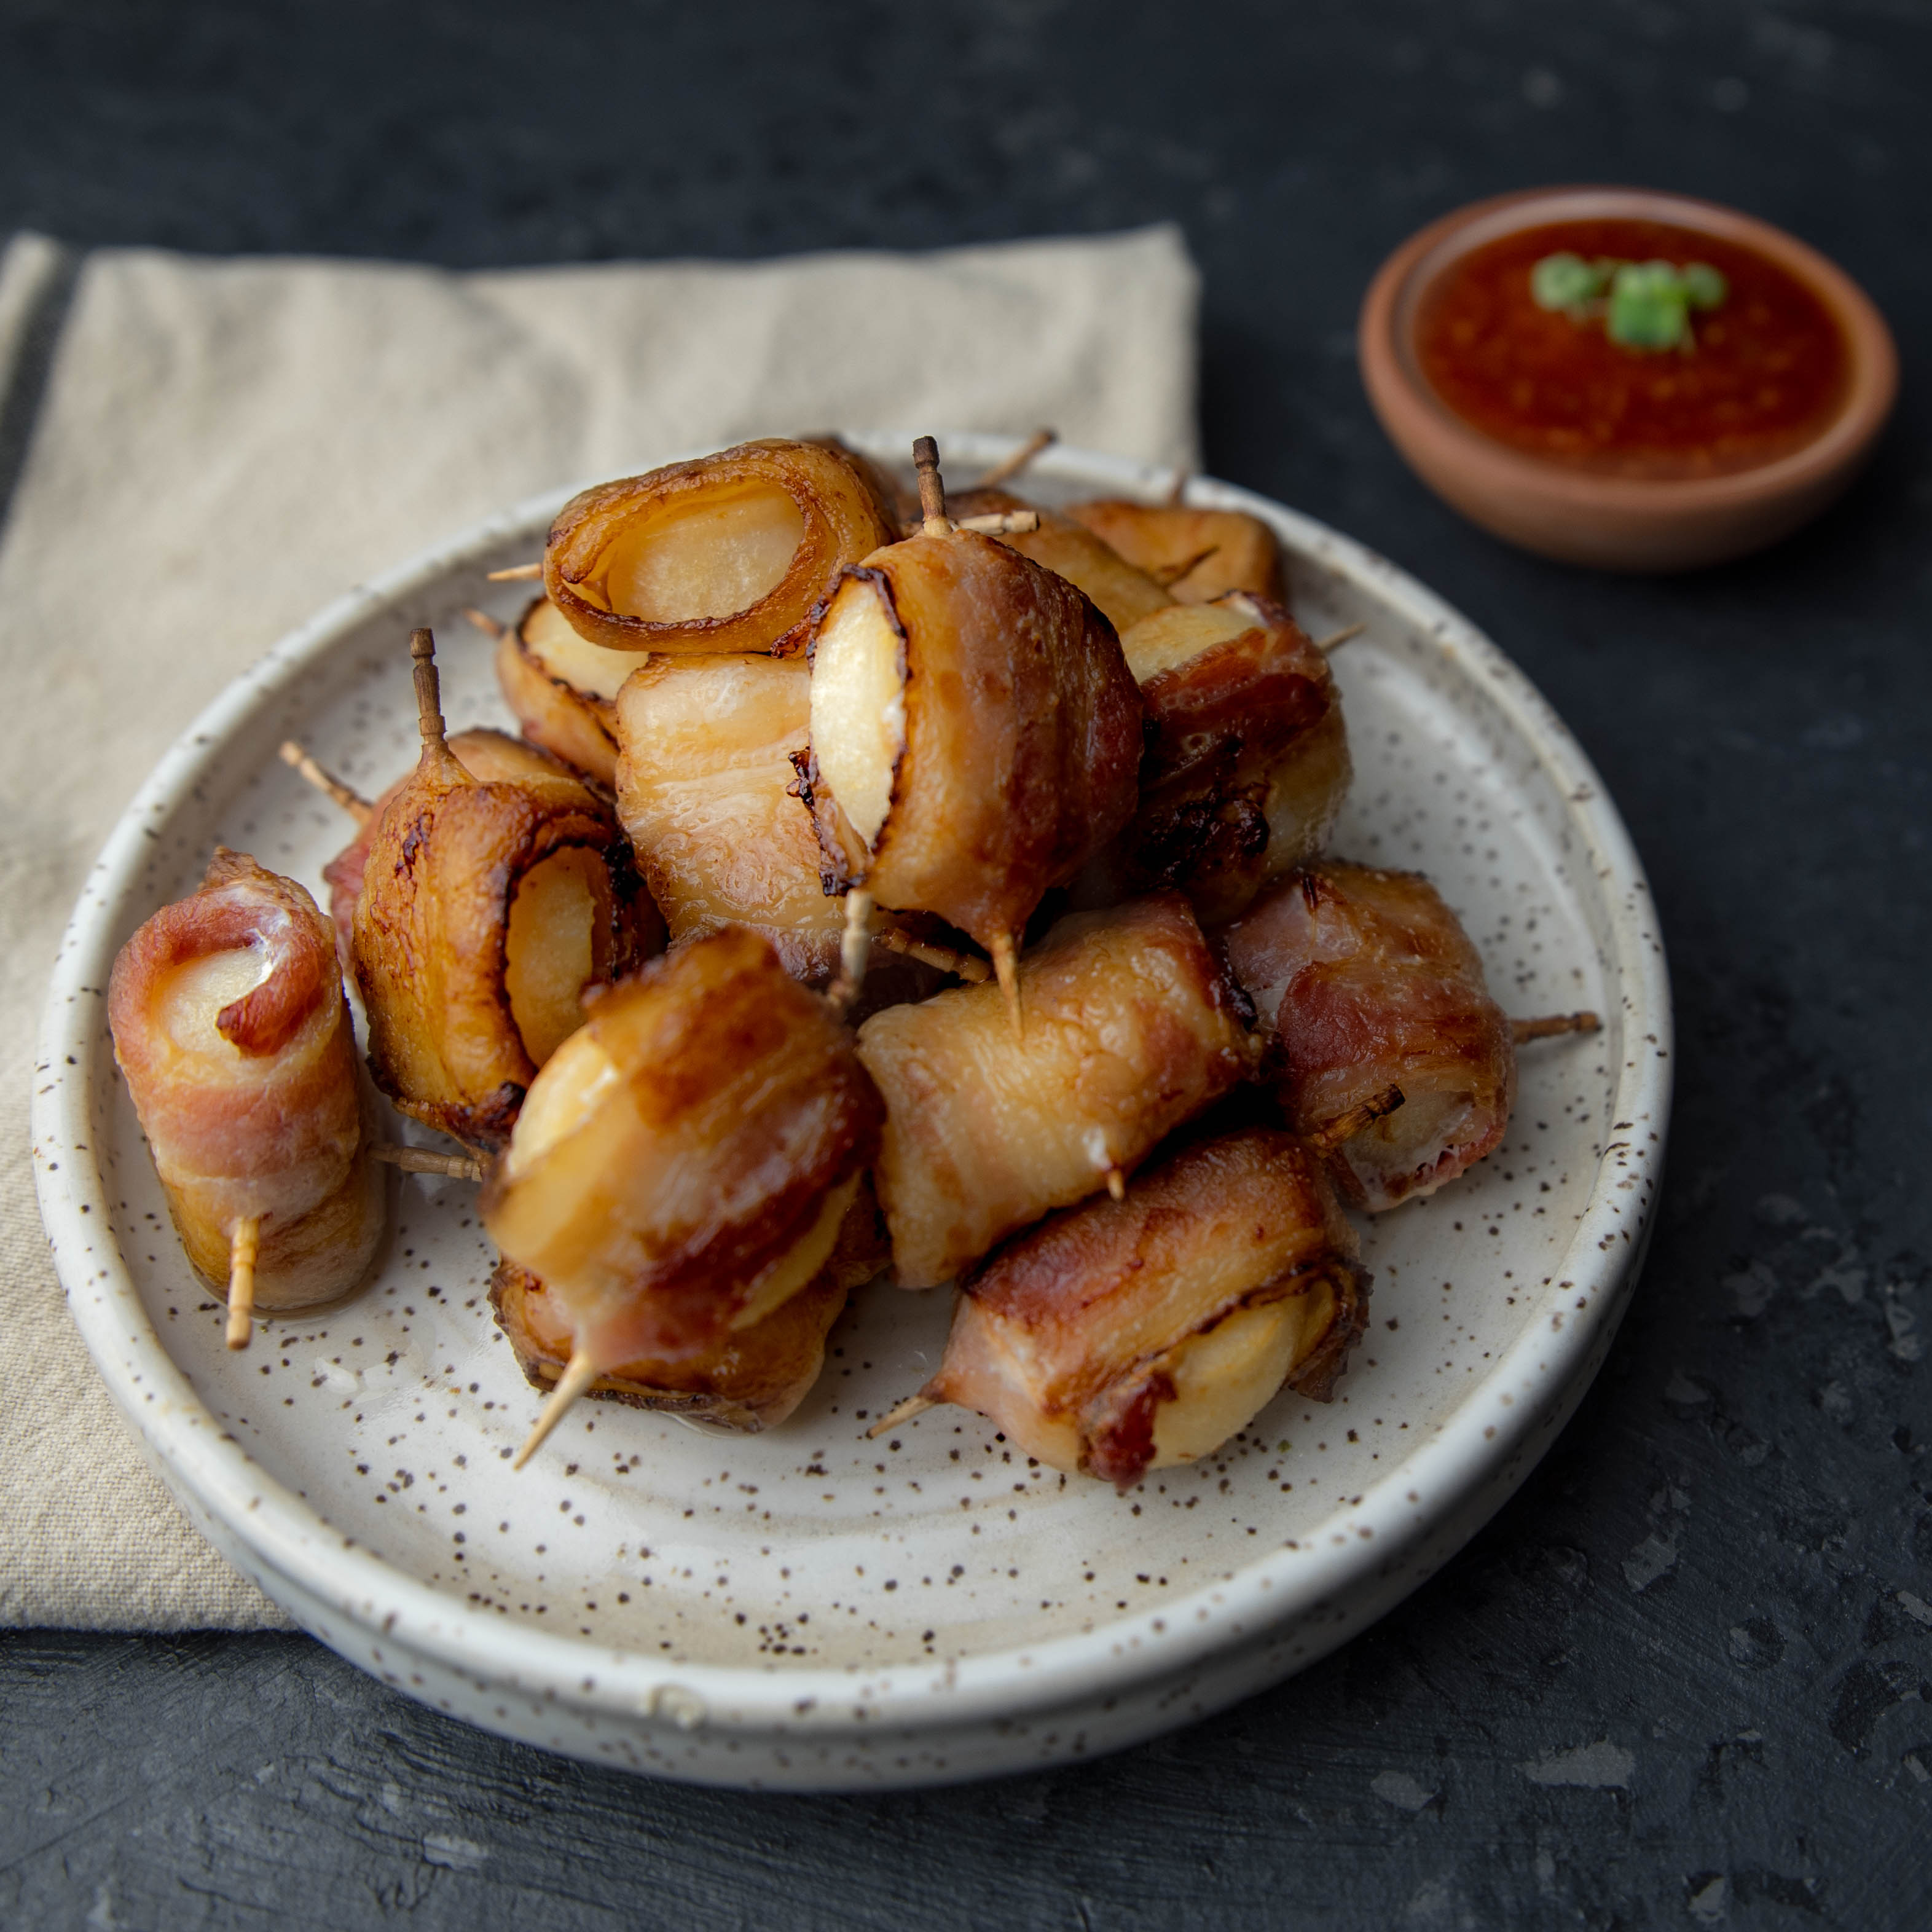 Scallops and bacon